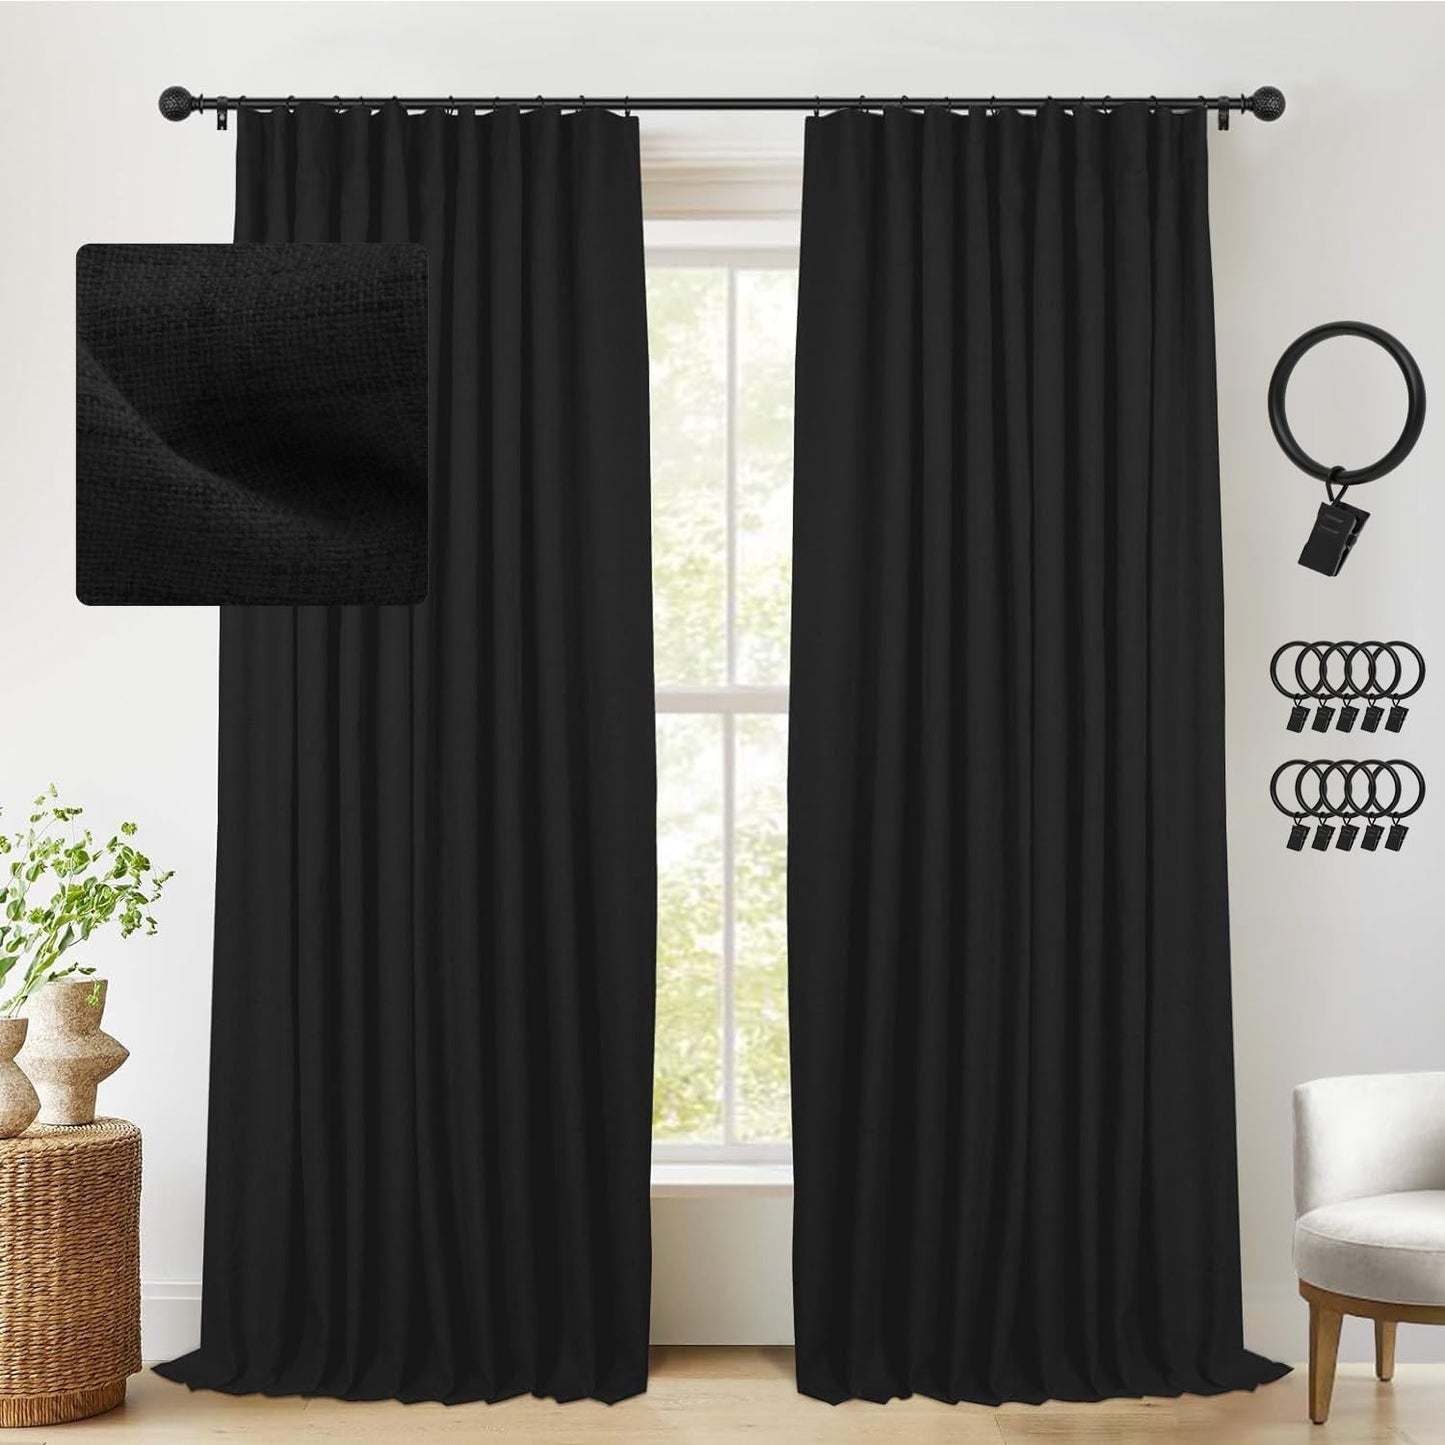 INOVADAY Linen Blackout Curtains 96 Inches Long, Thermal Insulated Black Out Curtains & Drapes for Living Room Bedroom (W50 X L96 1 Panels, Beige)  INOVADAY Black 50"W X 96"L 